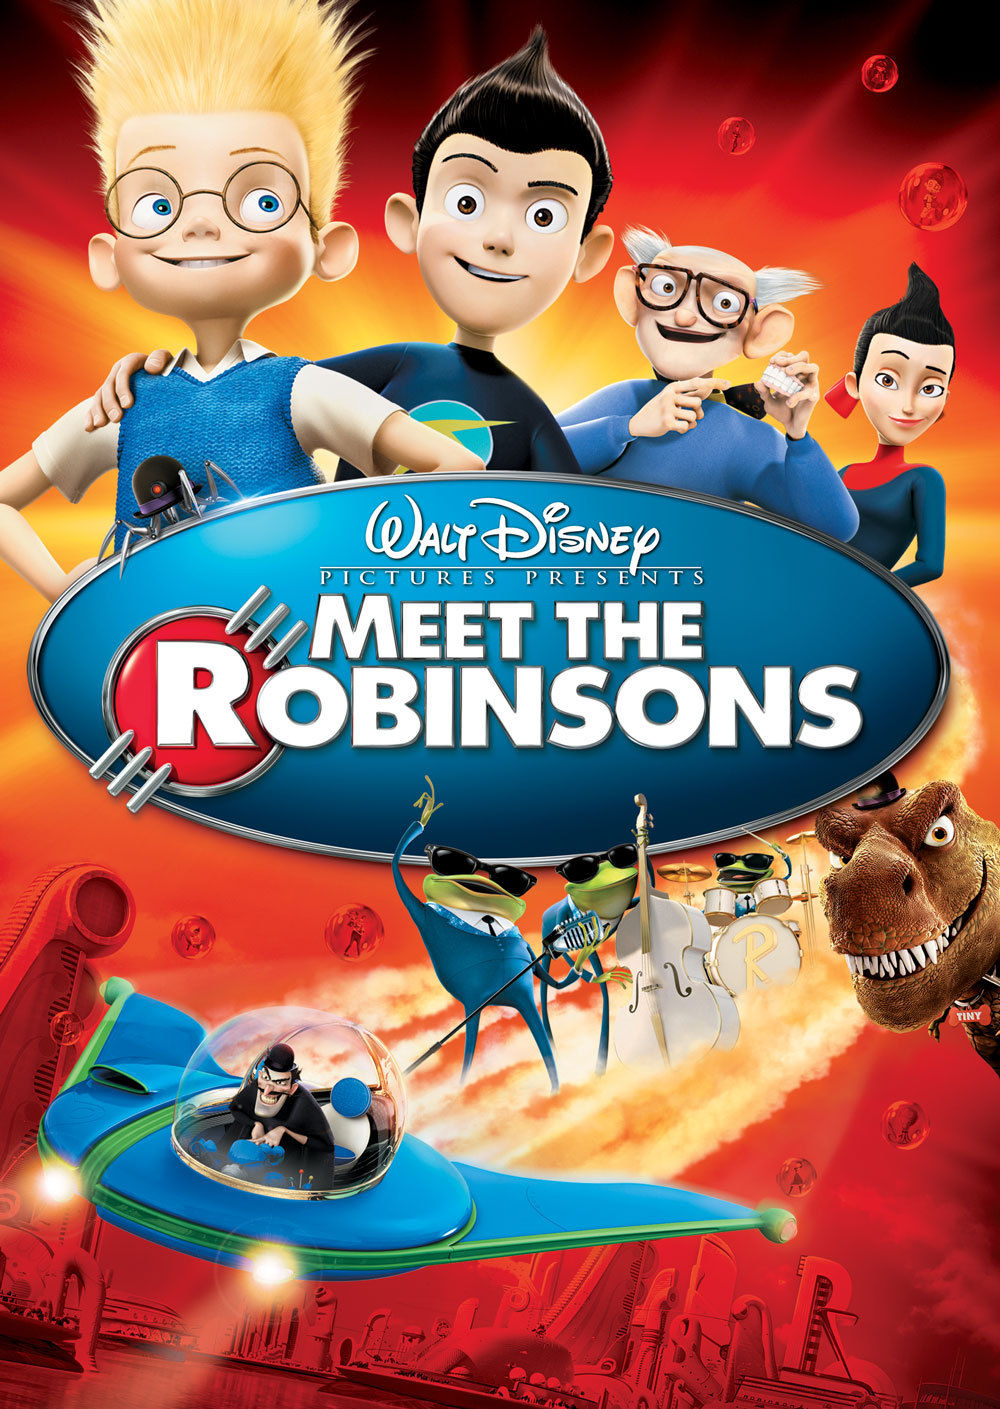 Lewis (Meet the Robinsons)